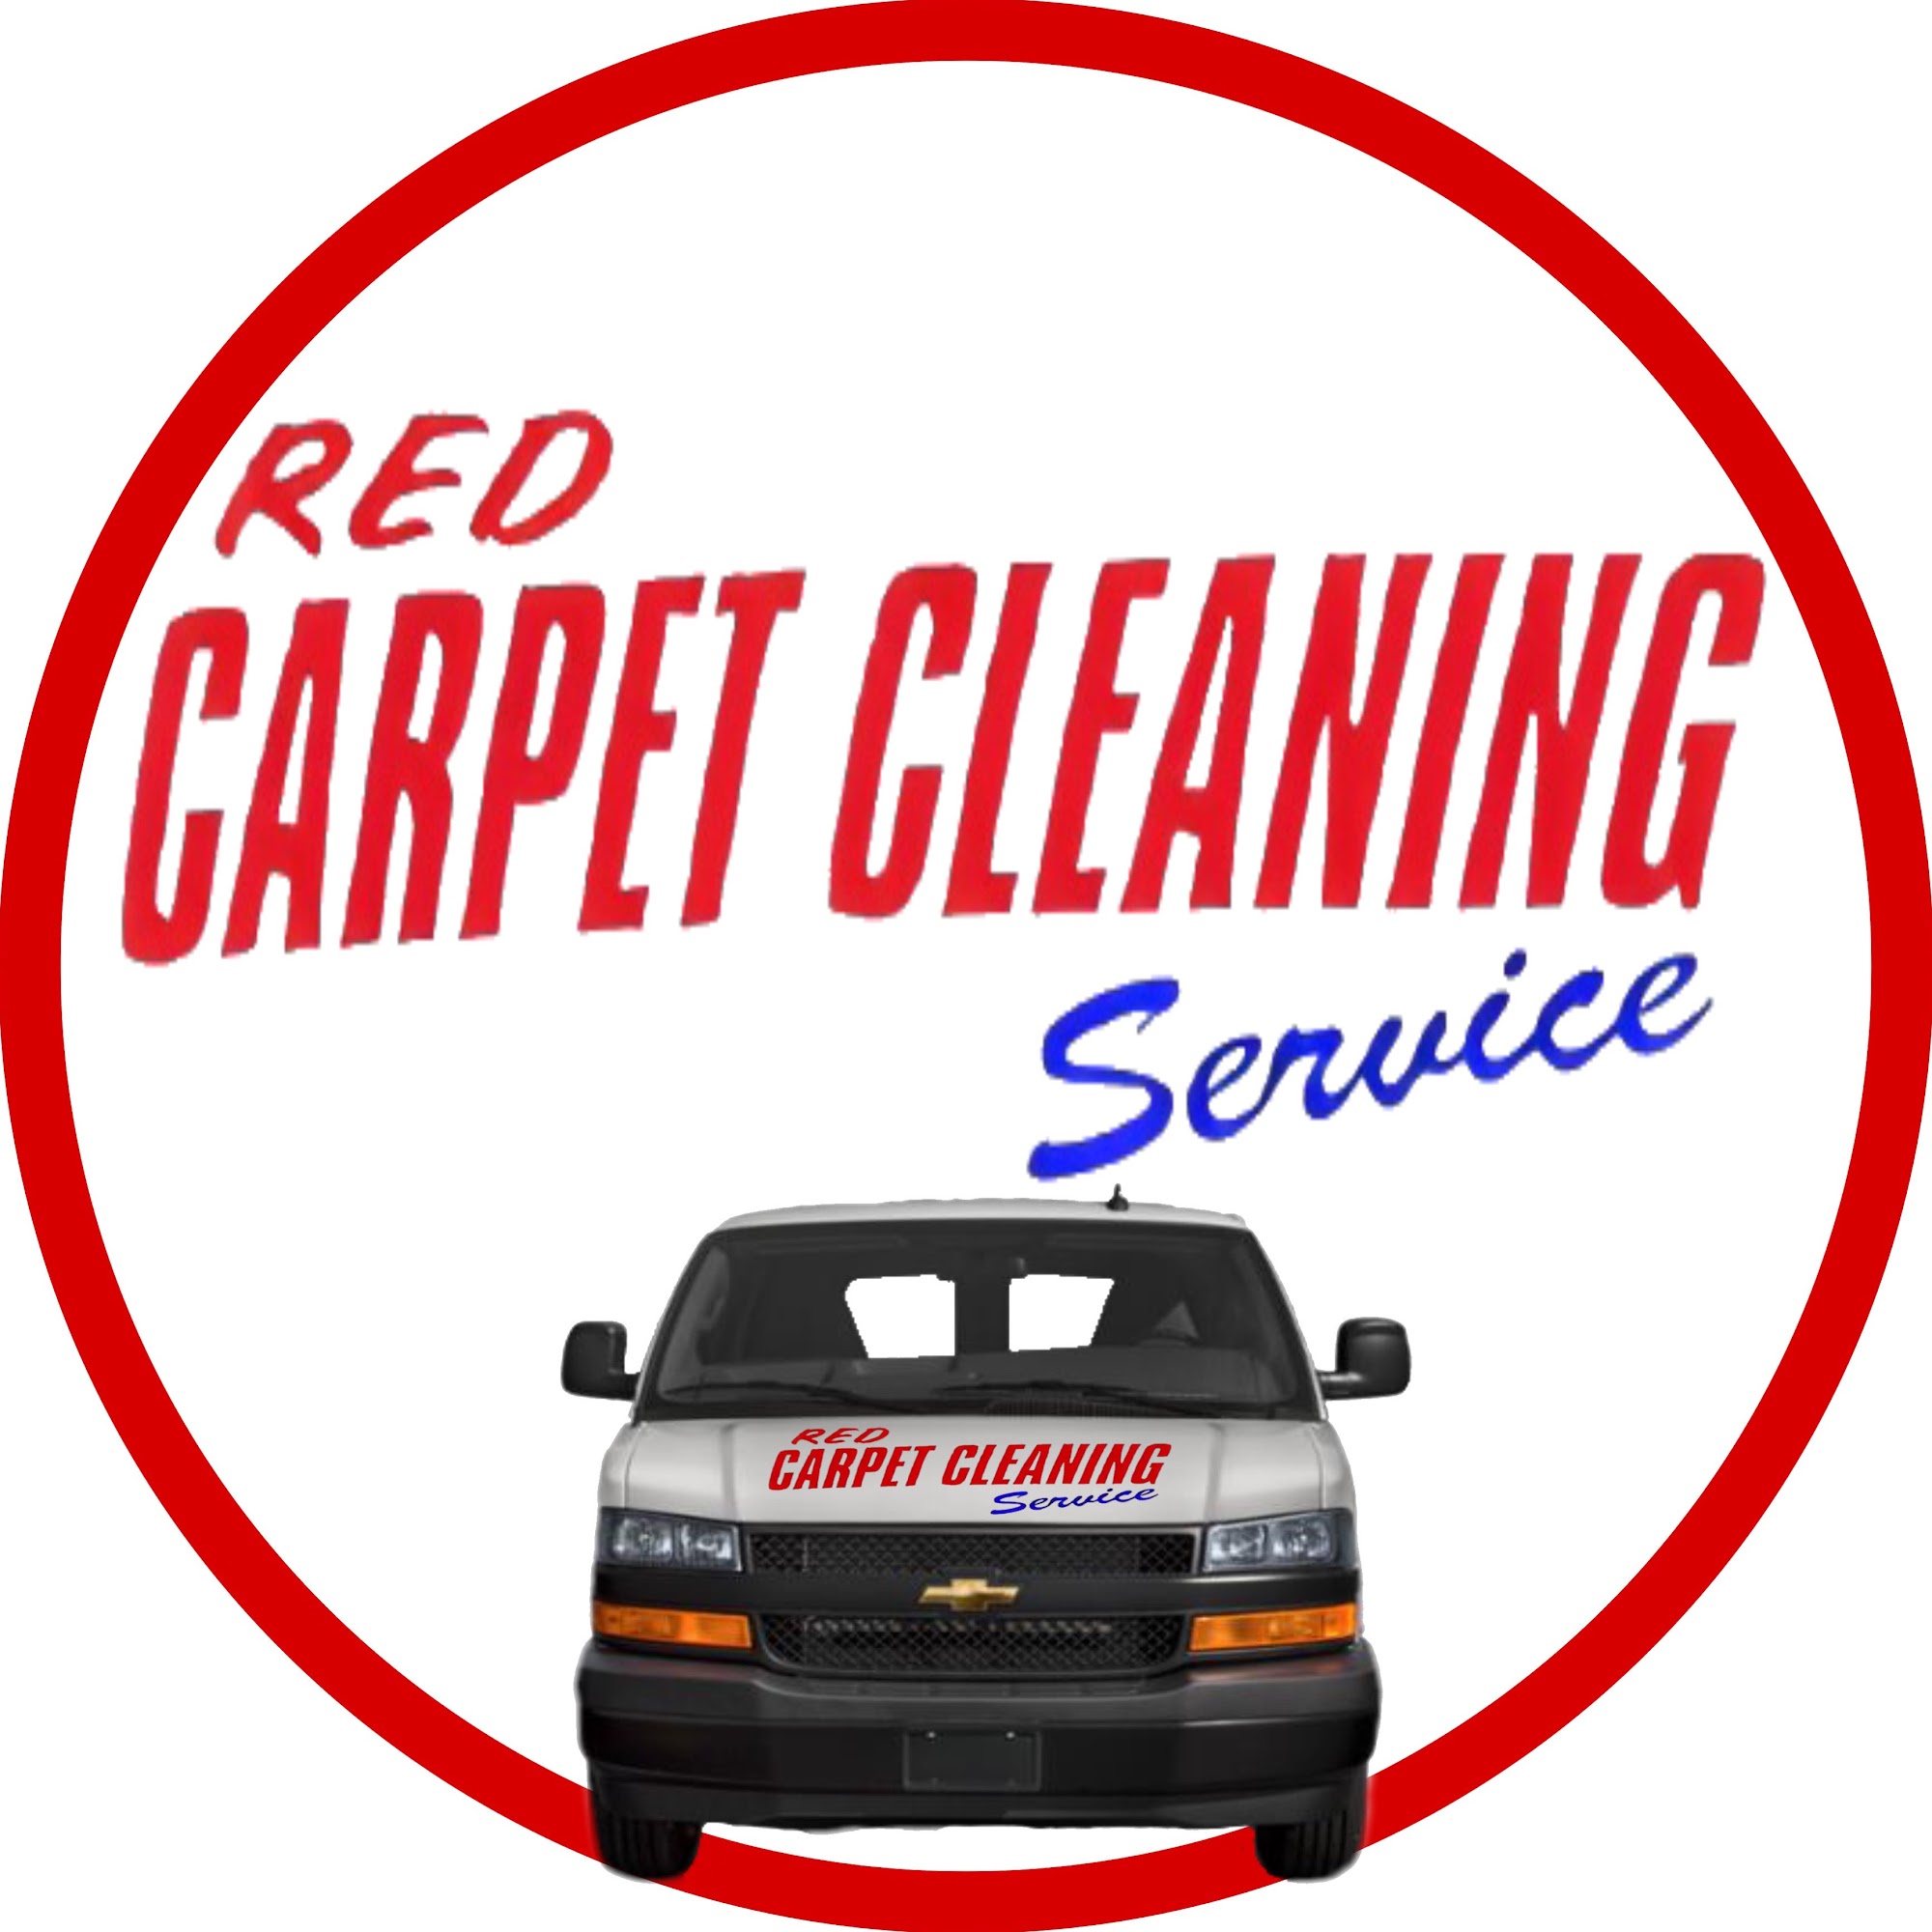 Red Carpet Cleaning Service LLC.